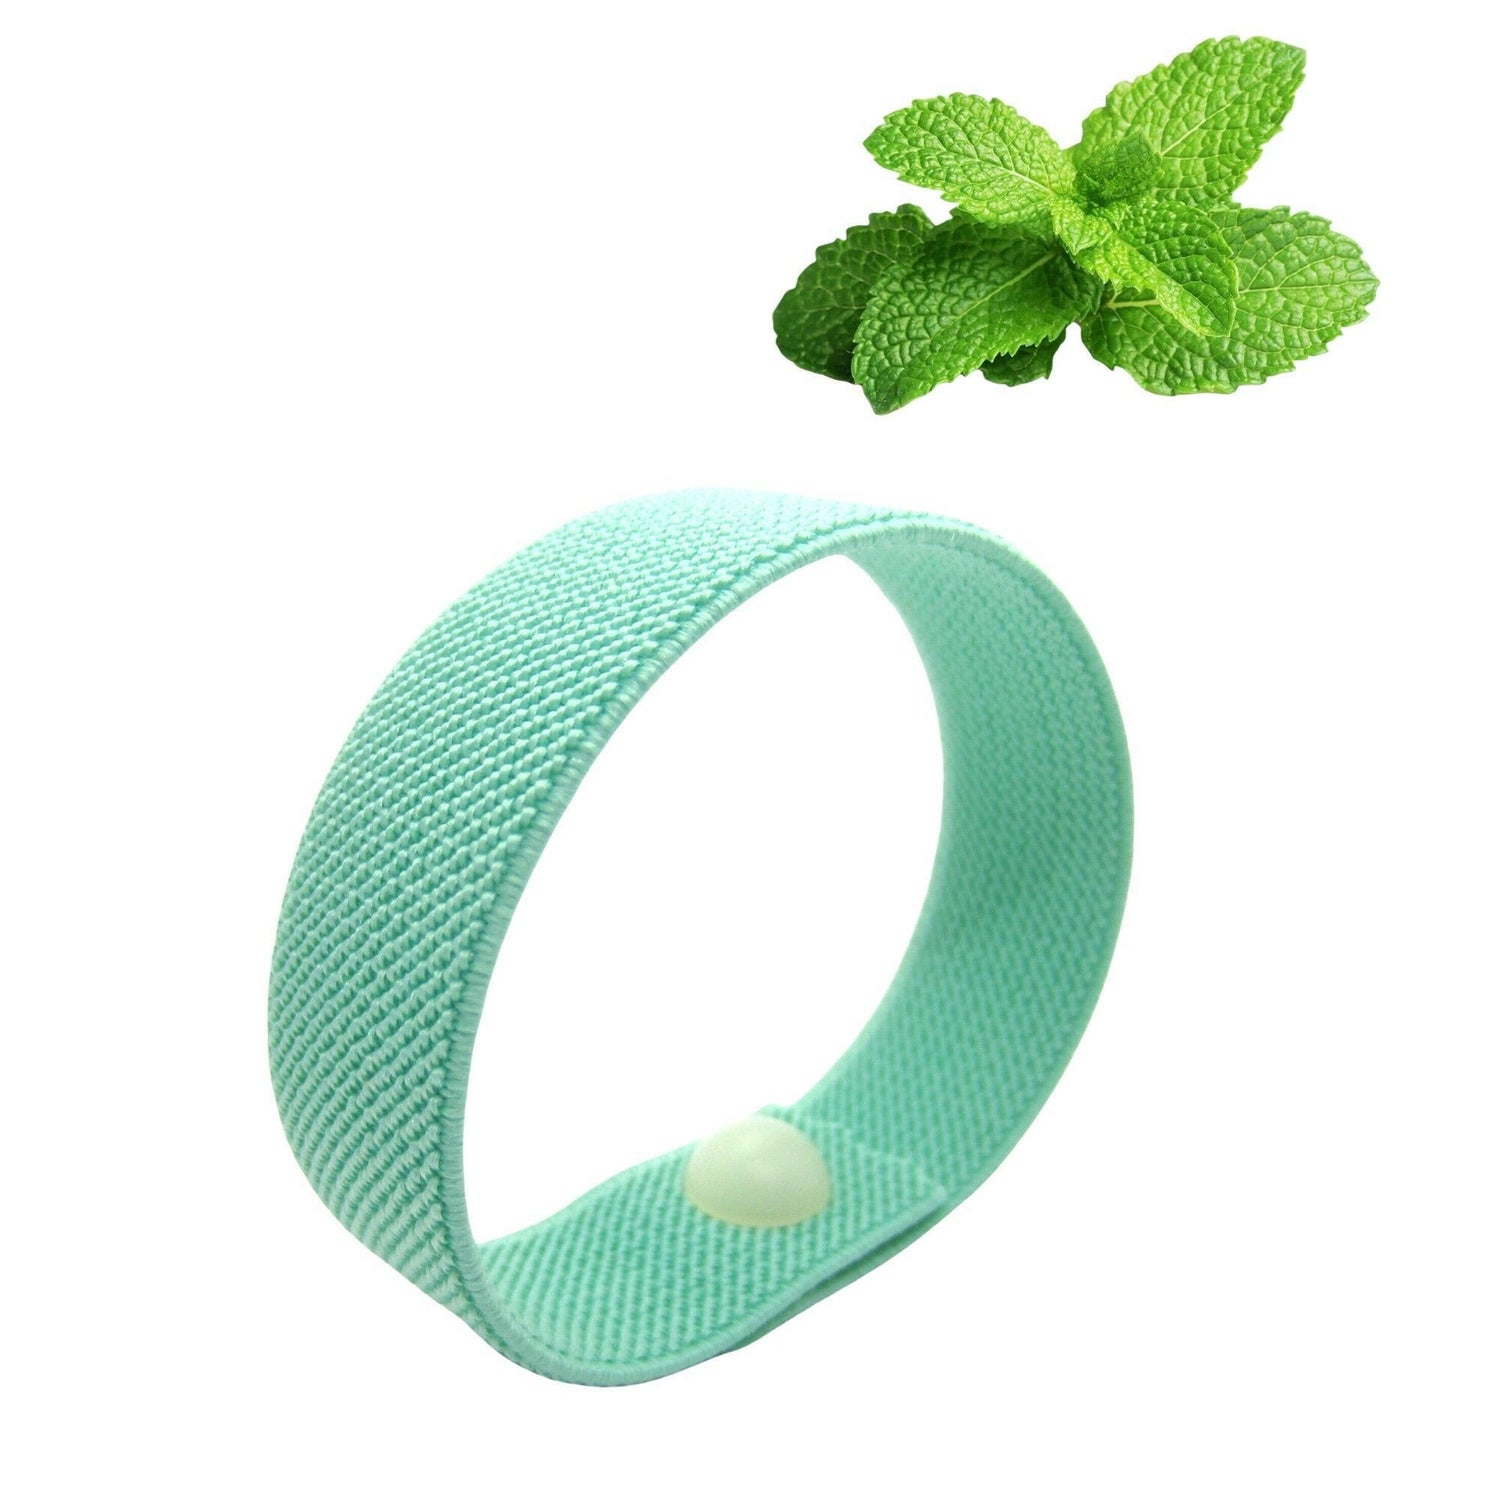 AcuBalance Scented Stress Relief Bracelet- Calming Acupressure- Sleep Aid- Pain Free- 8+ Essential Oils- Great for Anxiety, Hot Flashes - Acupressure Bracelets